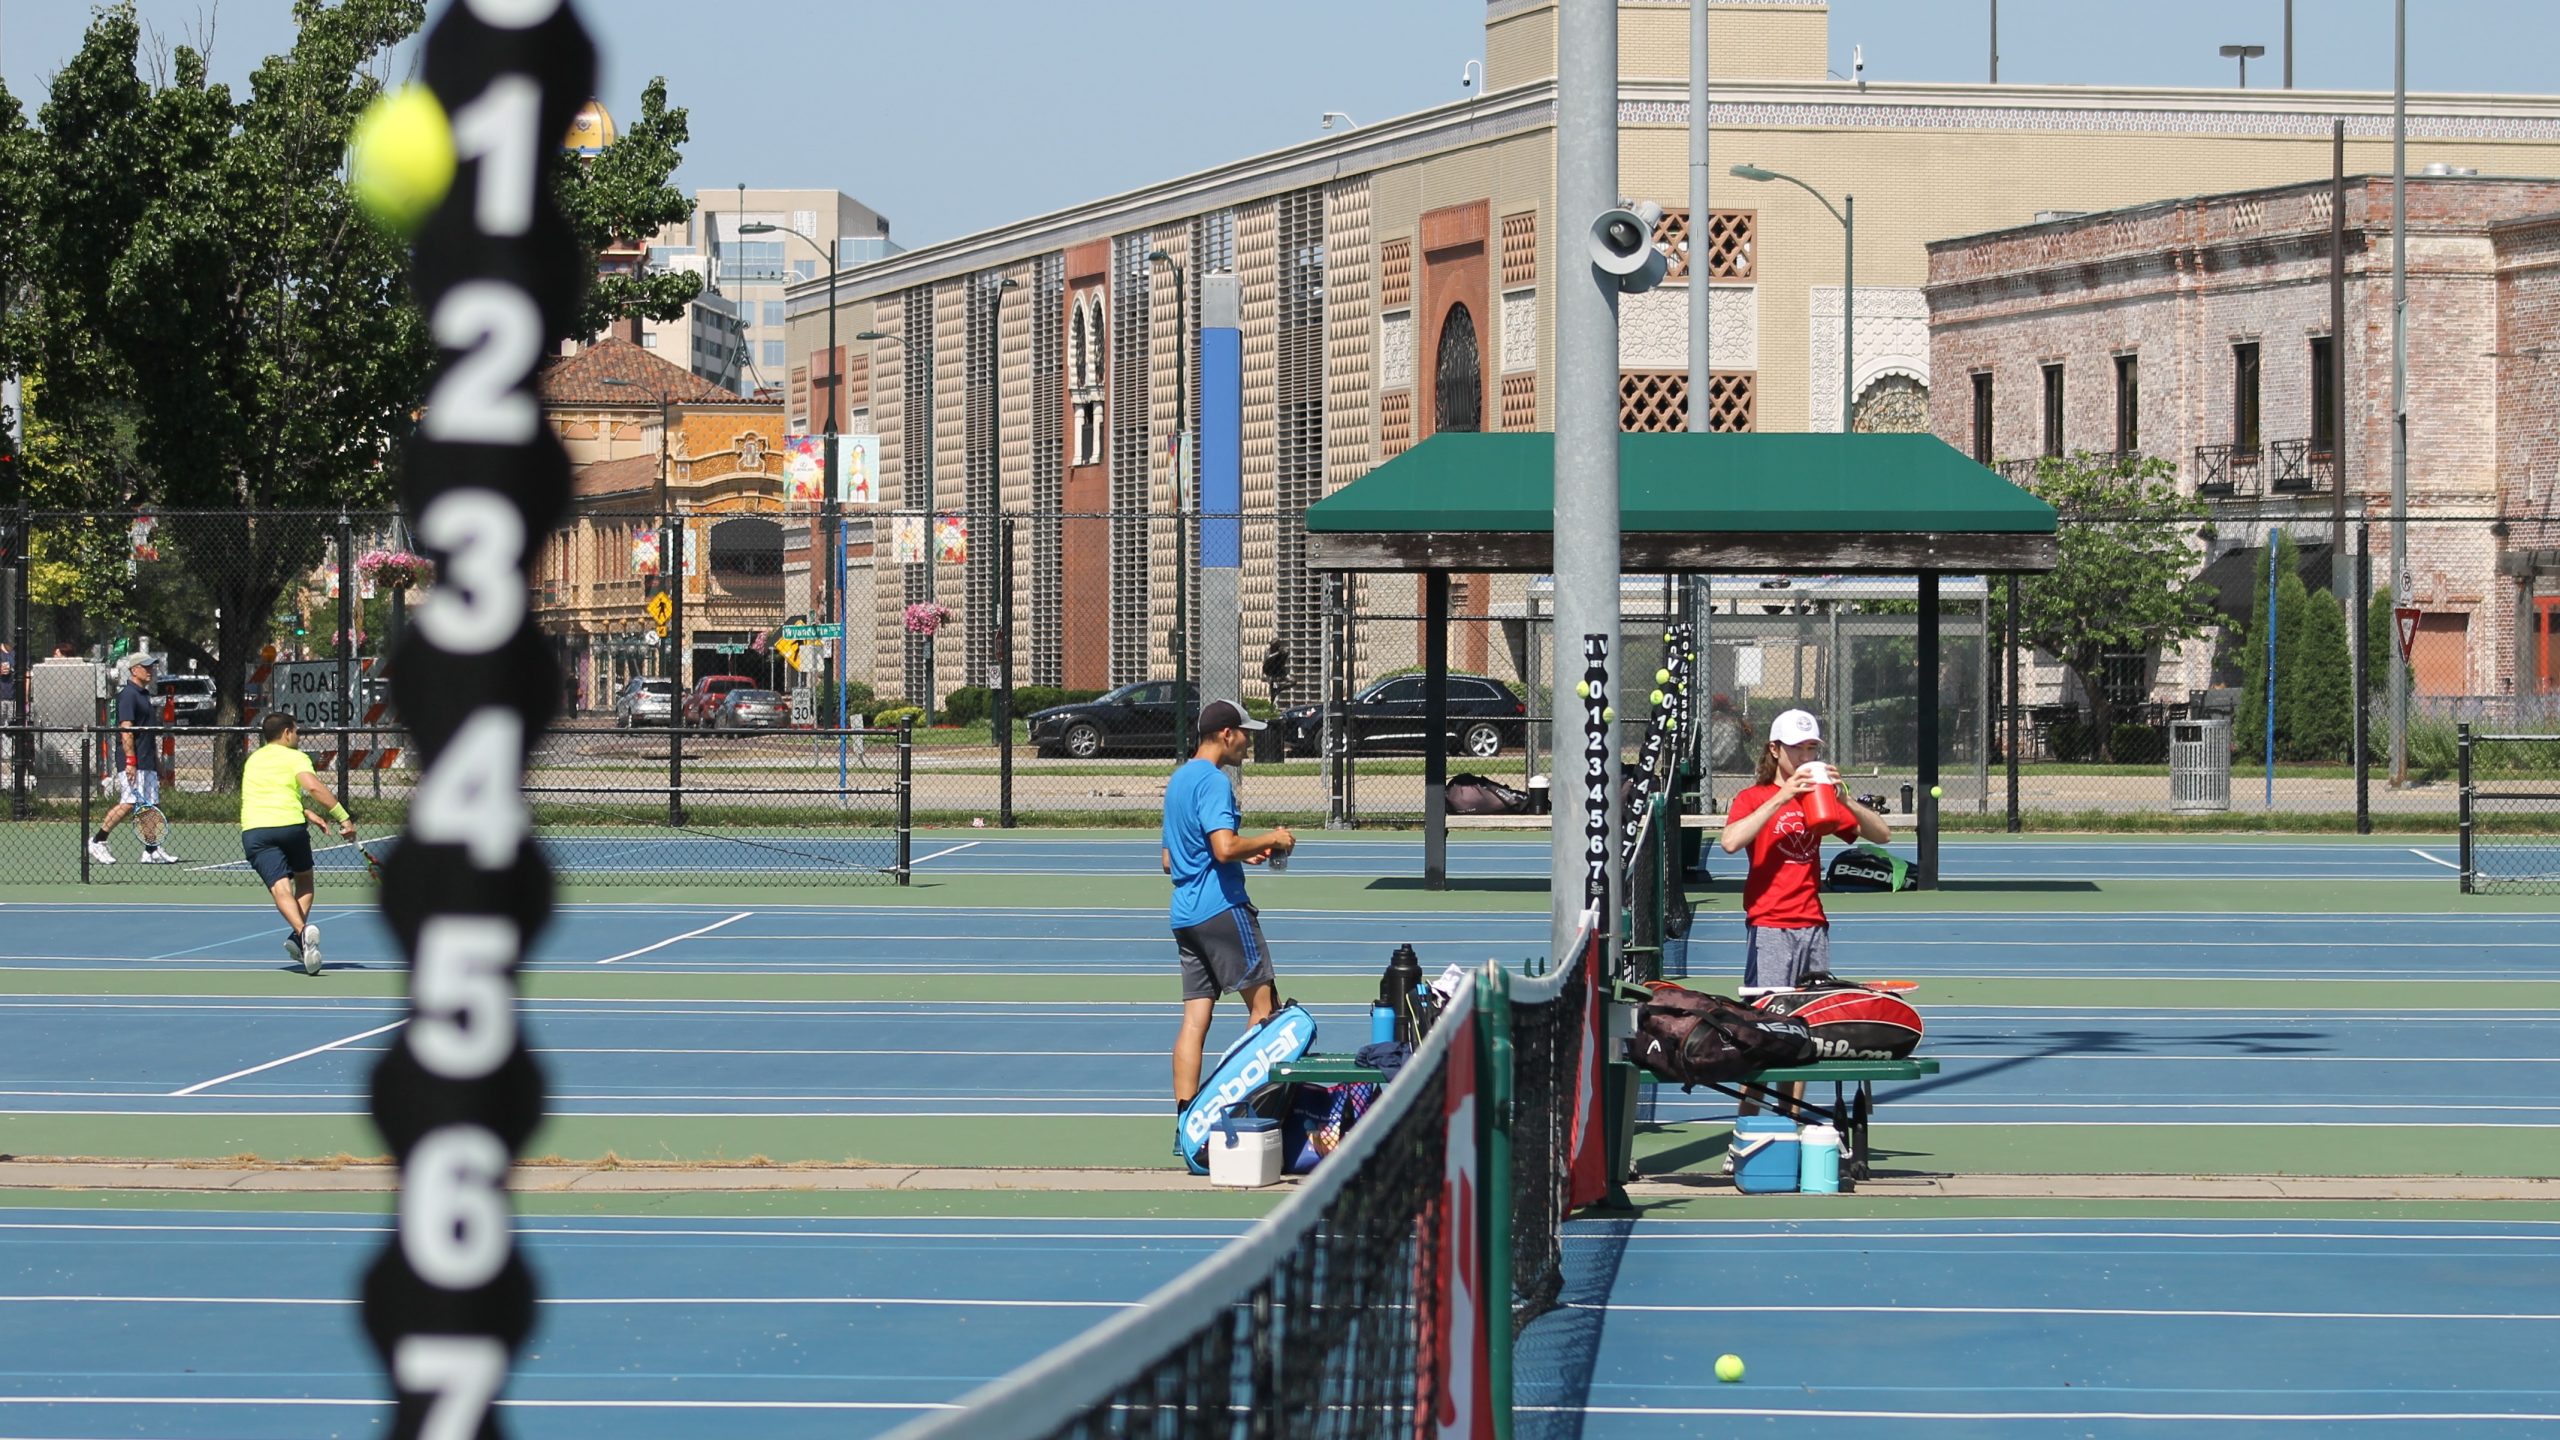 Get Healthy. Play Tennis at Plaza Tennis Center